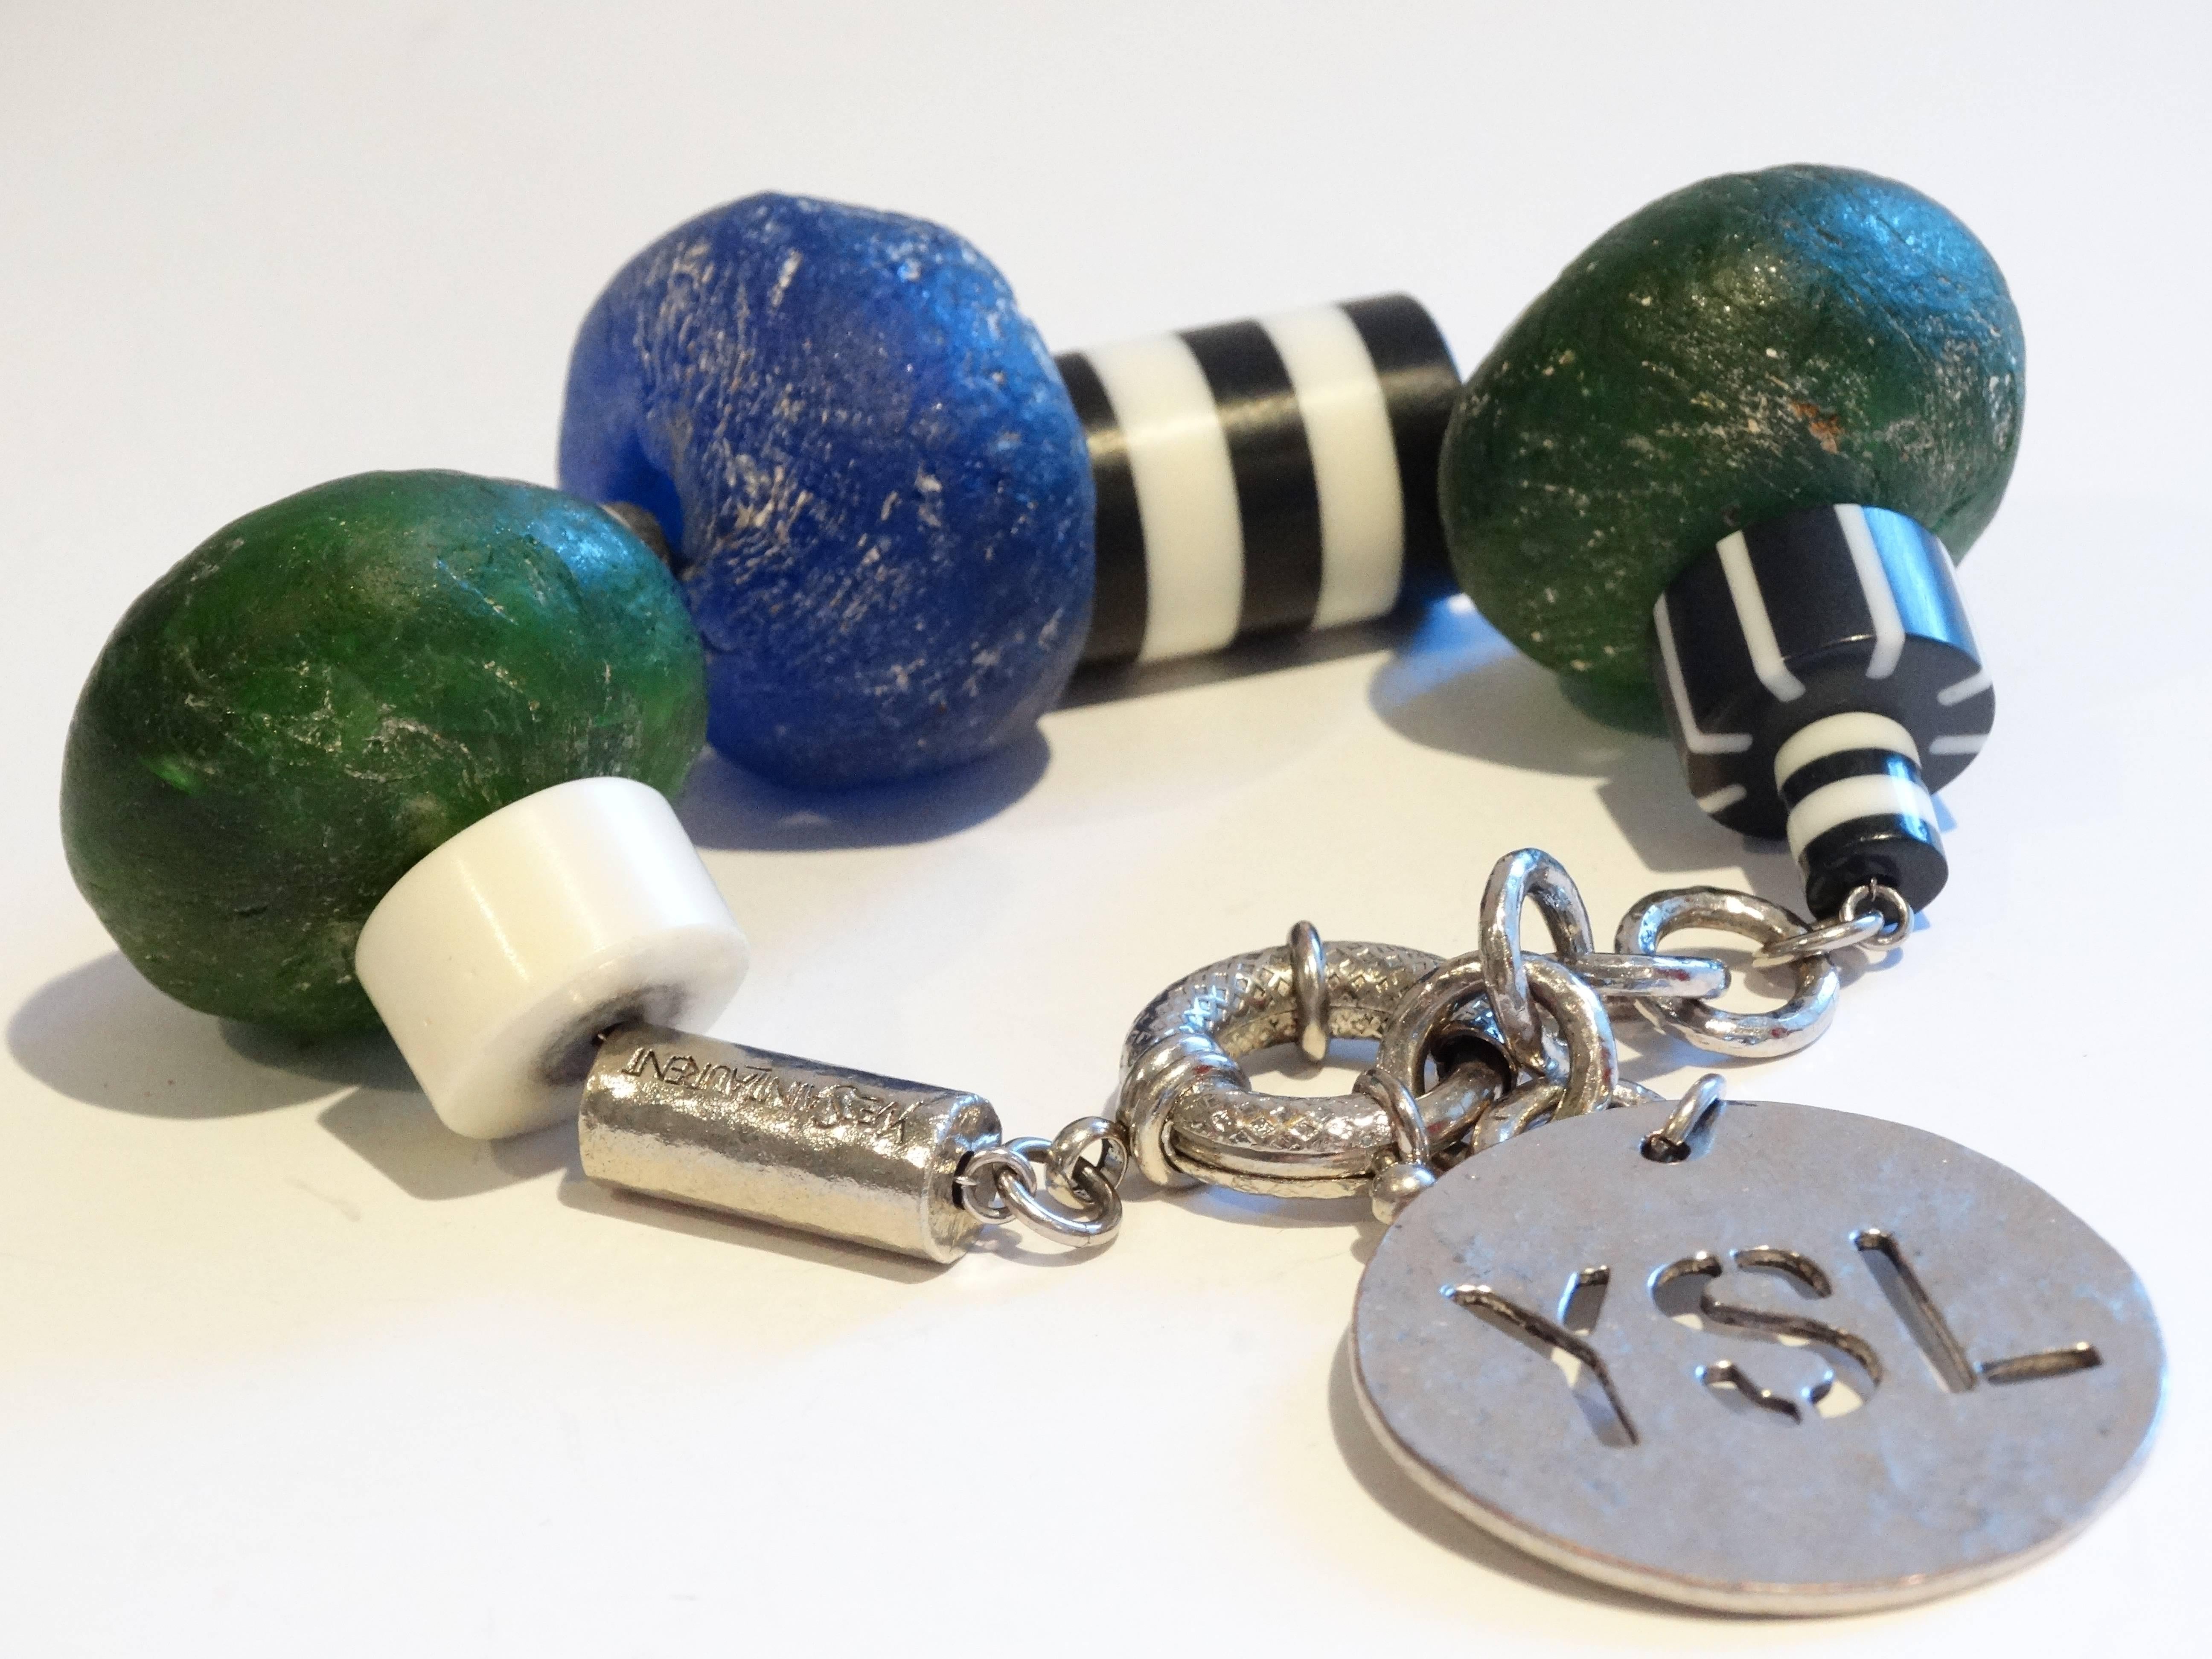 Super cool 1980's Yves Saint Laurent sea glass beaded bracelet with a huge YSL charm plate. Black and White Acrylic beads in between the blue and green sea glass. Strung on a think silver wire signed Yves Saint Laurent on one silver bead. Adjustable